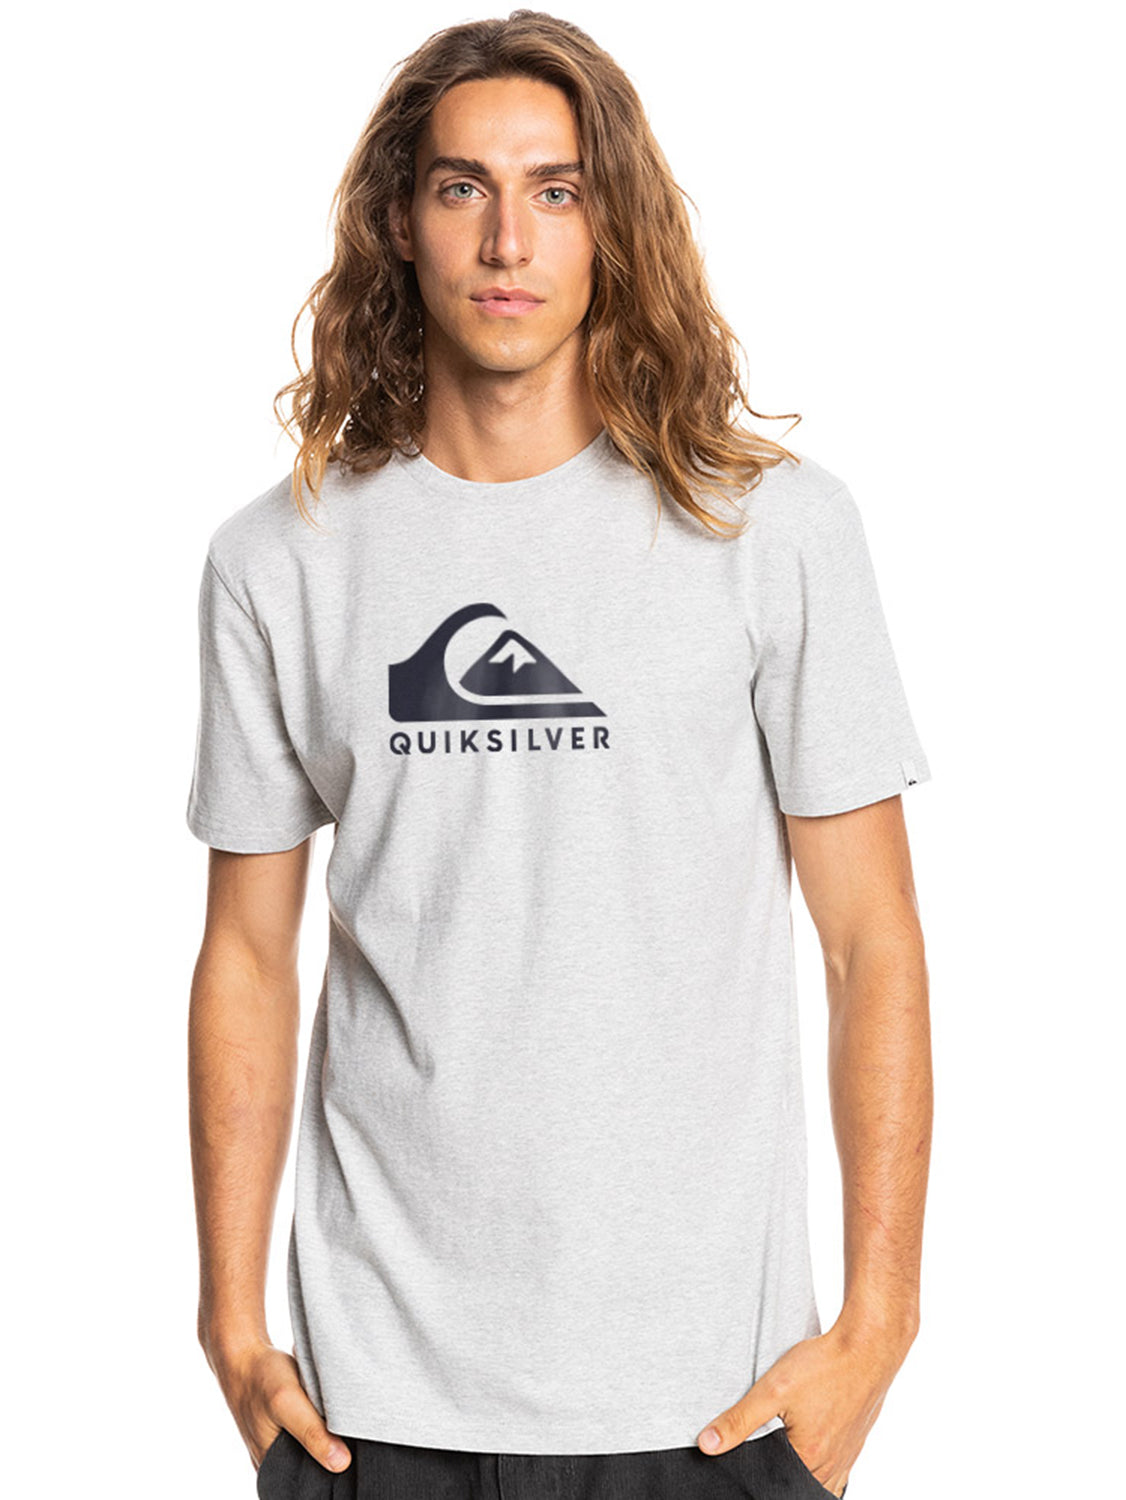 Men Lifestyle Clothing | Exclusive Deals Page 15 | Boardriders